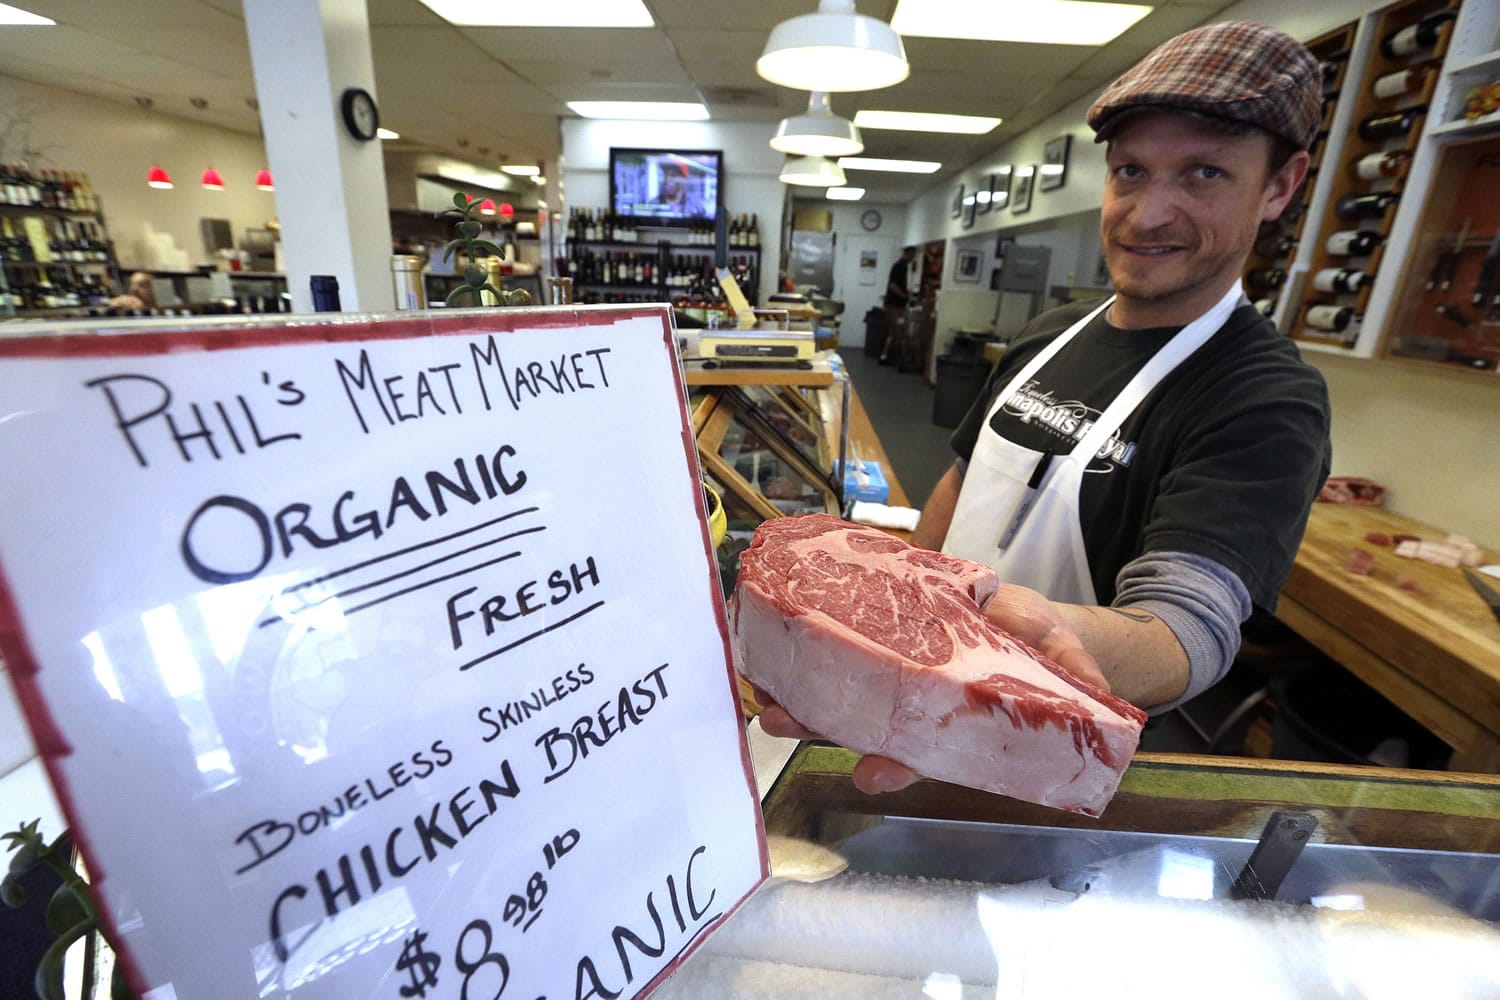 Butcher Brandon Rice shows a cut of antibiotic-free steak at Phil's Meat Market in Portland on Friday.